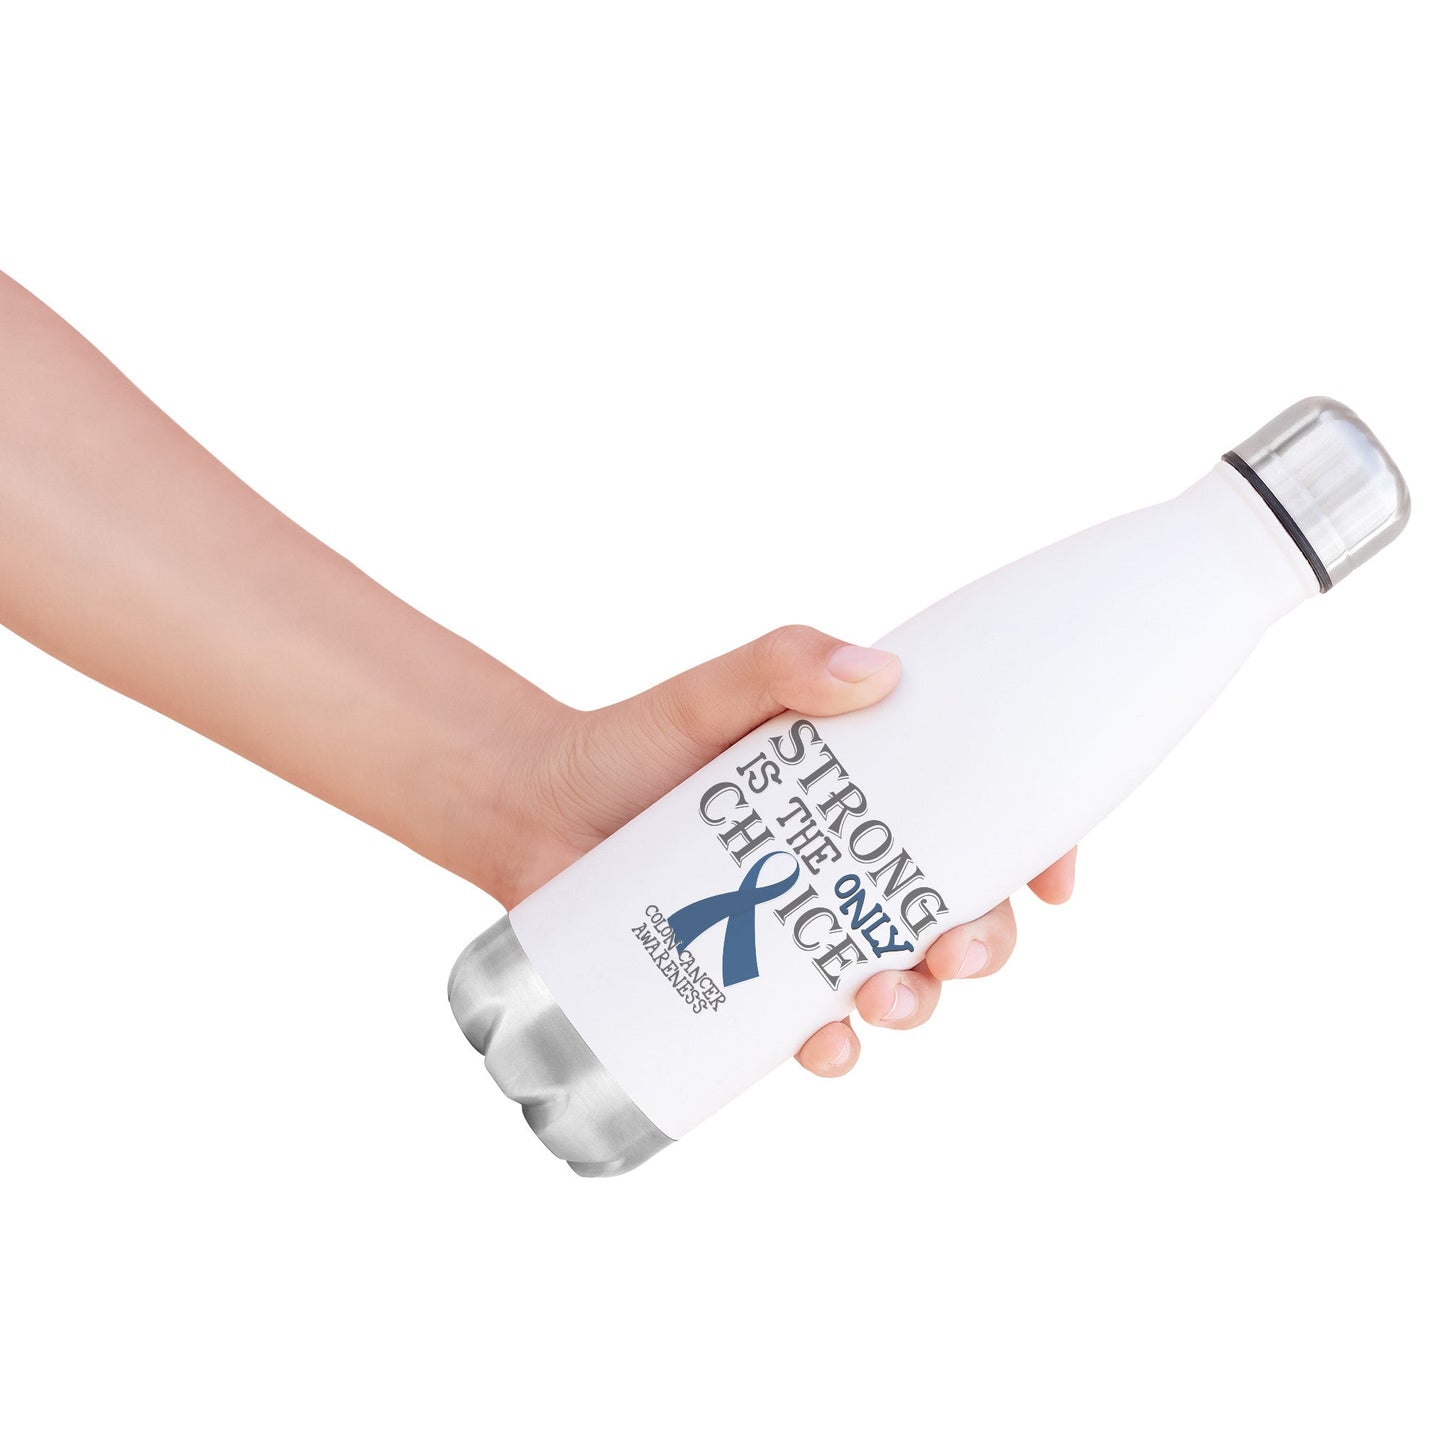 Strong is the Only Choice -Colon Cancer Awareness 20oz Insulated Water Bottle |x|